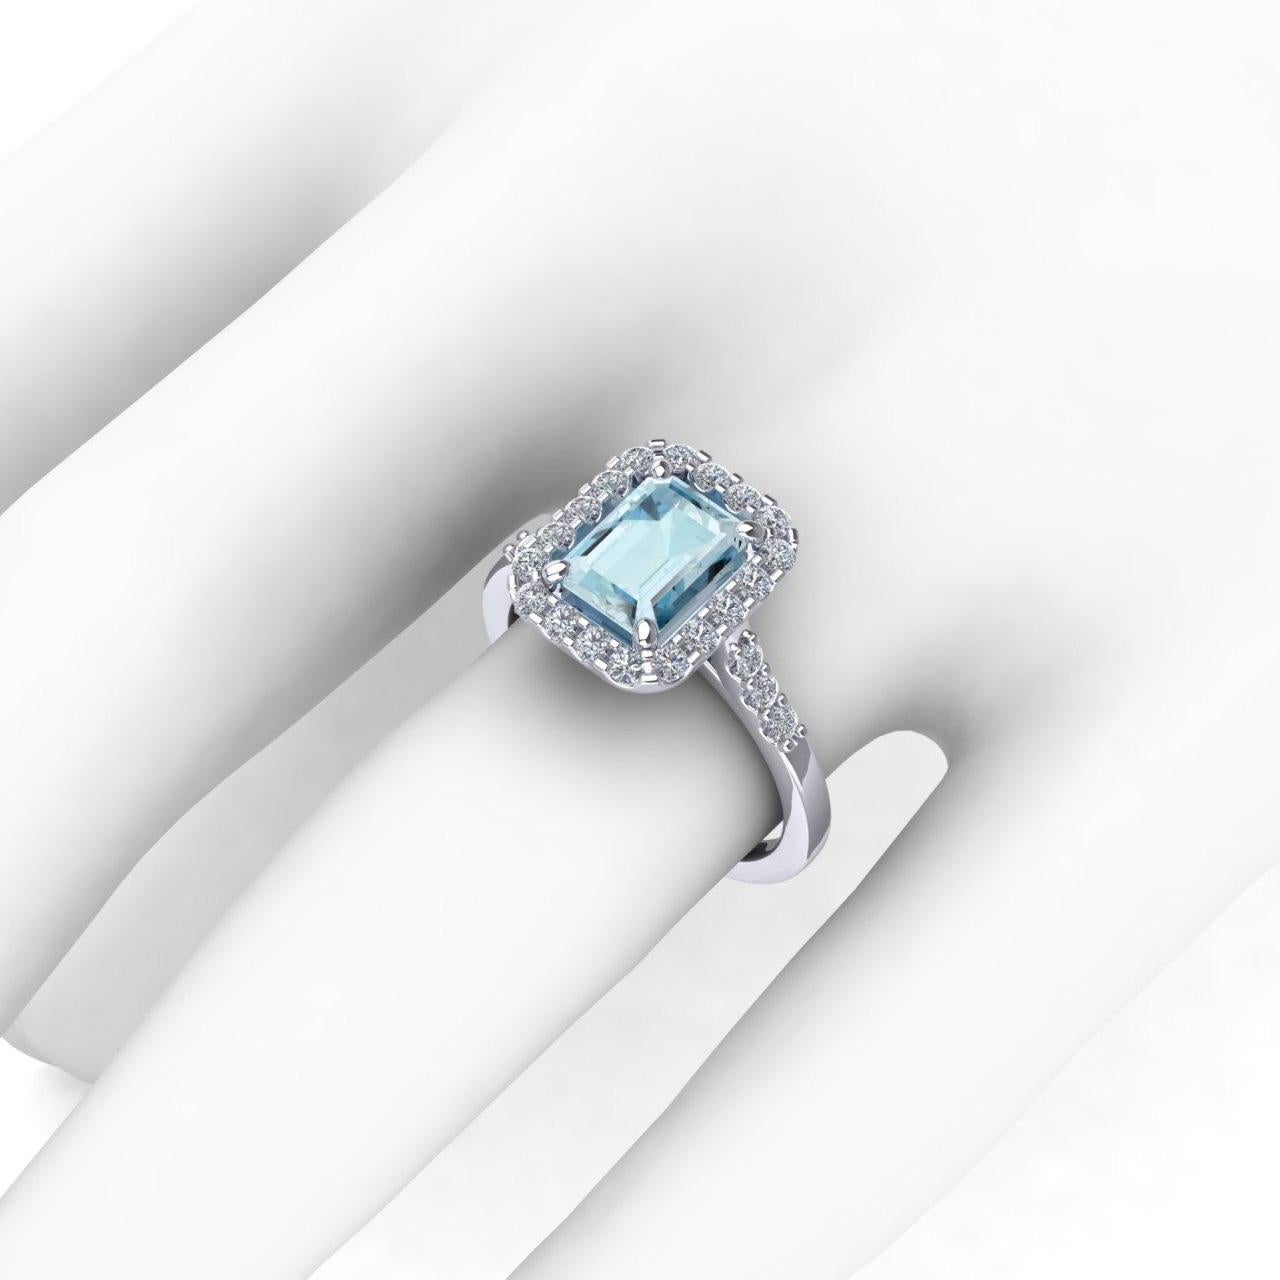 For Sale:  Modern Ring with Aquamarine and Natural Diamonds- White gold 18kt- Made in Italy 3